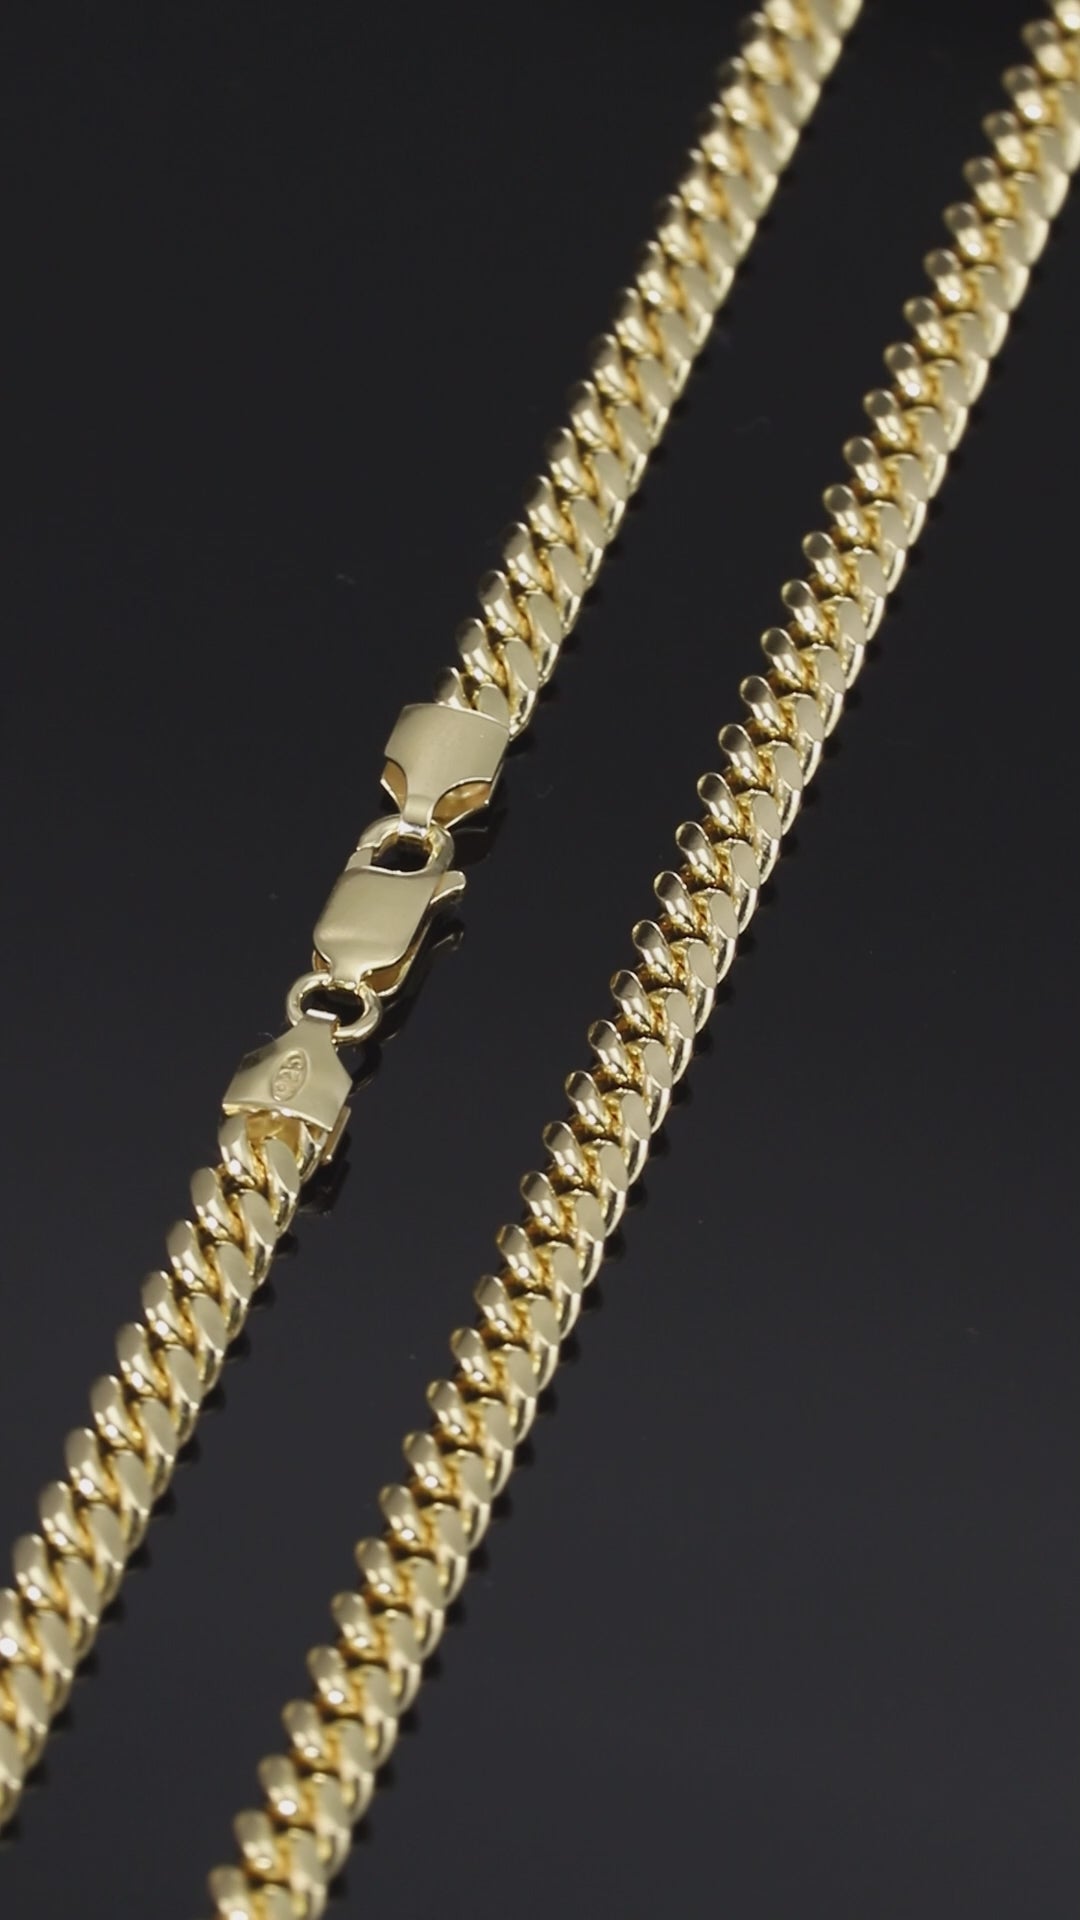 14K 3.5 mm Mariner Chain Link Necklace 16 Inches